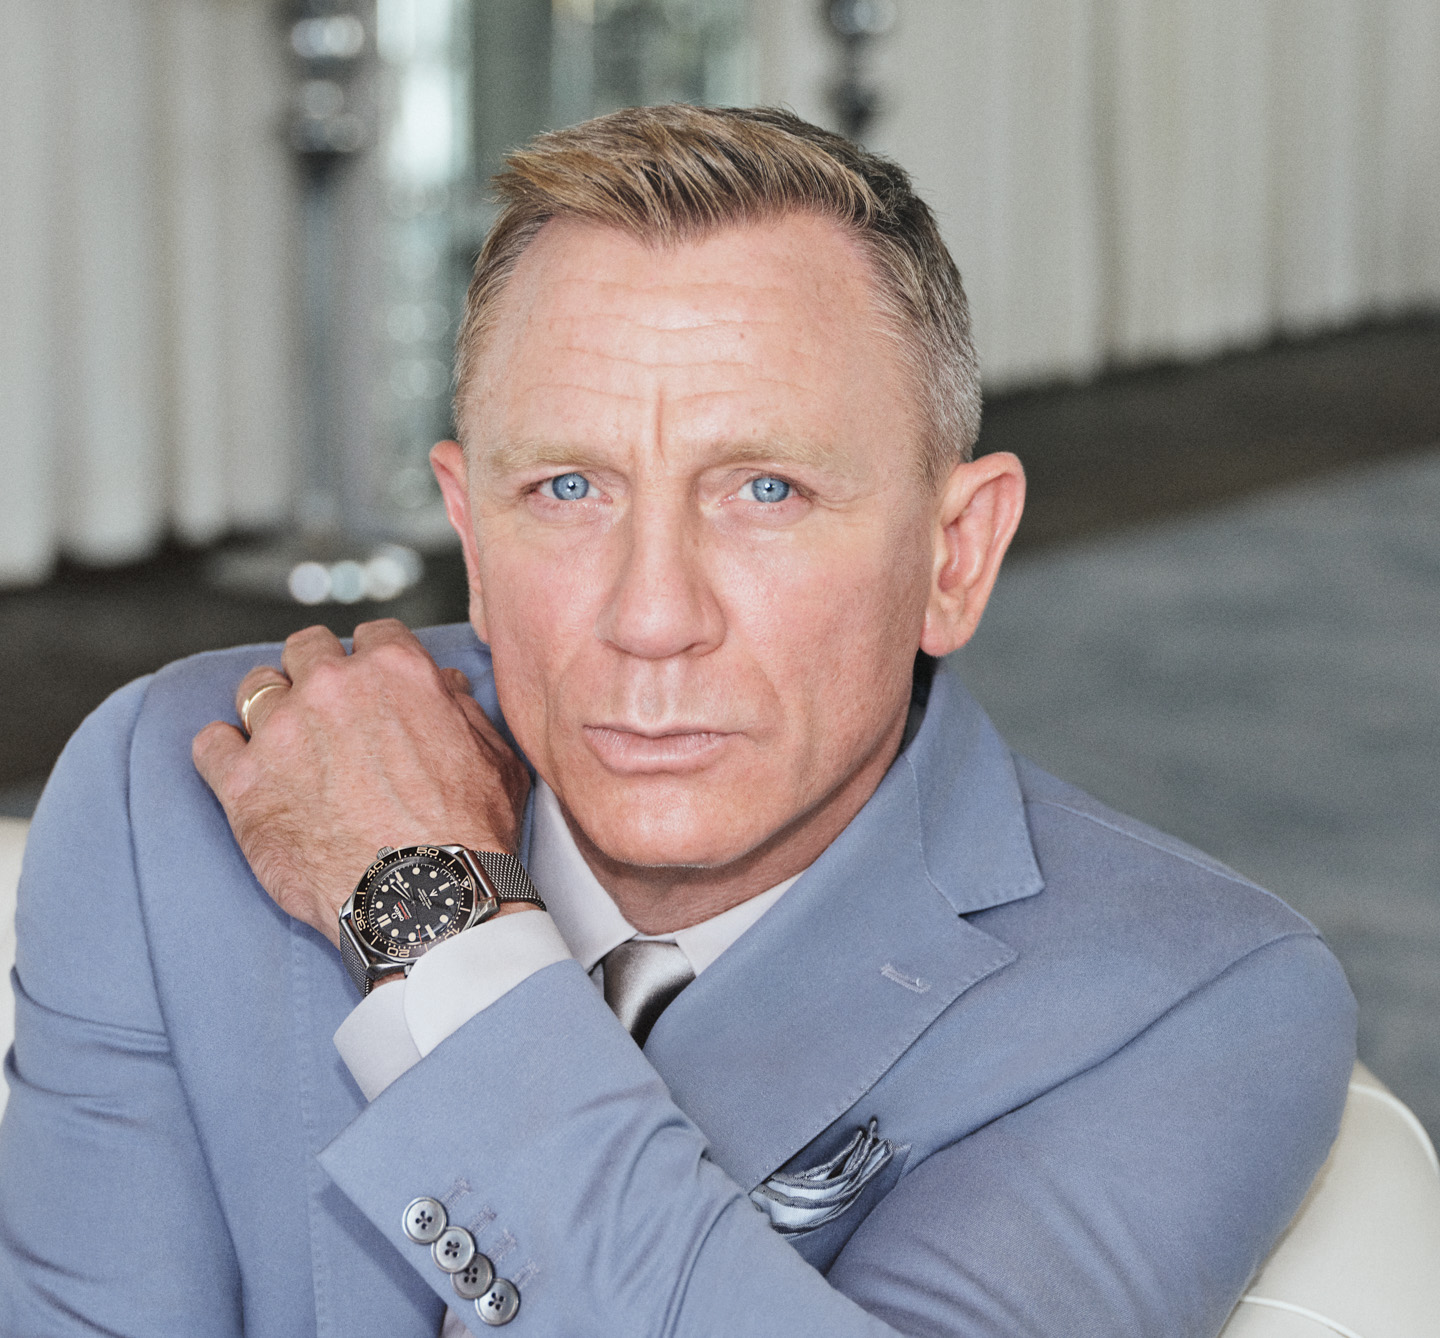 Unbranded No Time to Die Watch James Bond 007 Watch Spectre India | Ubuy